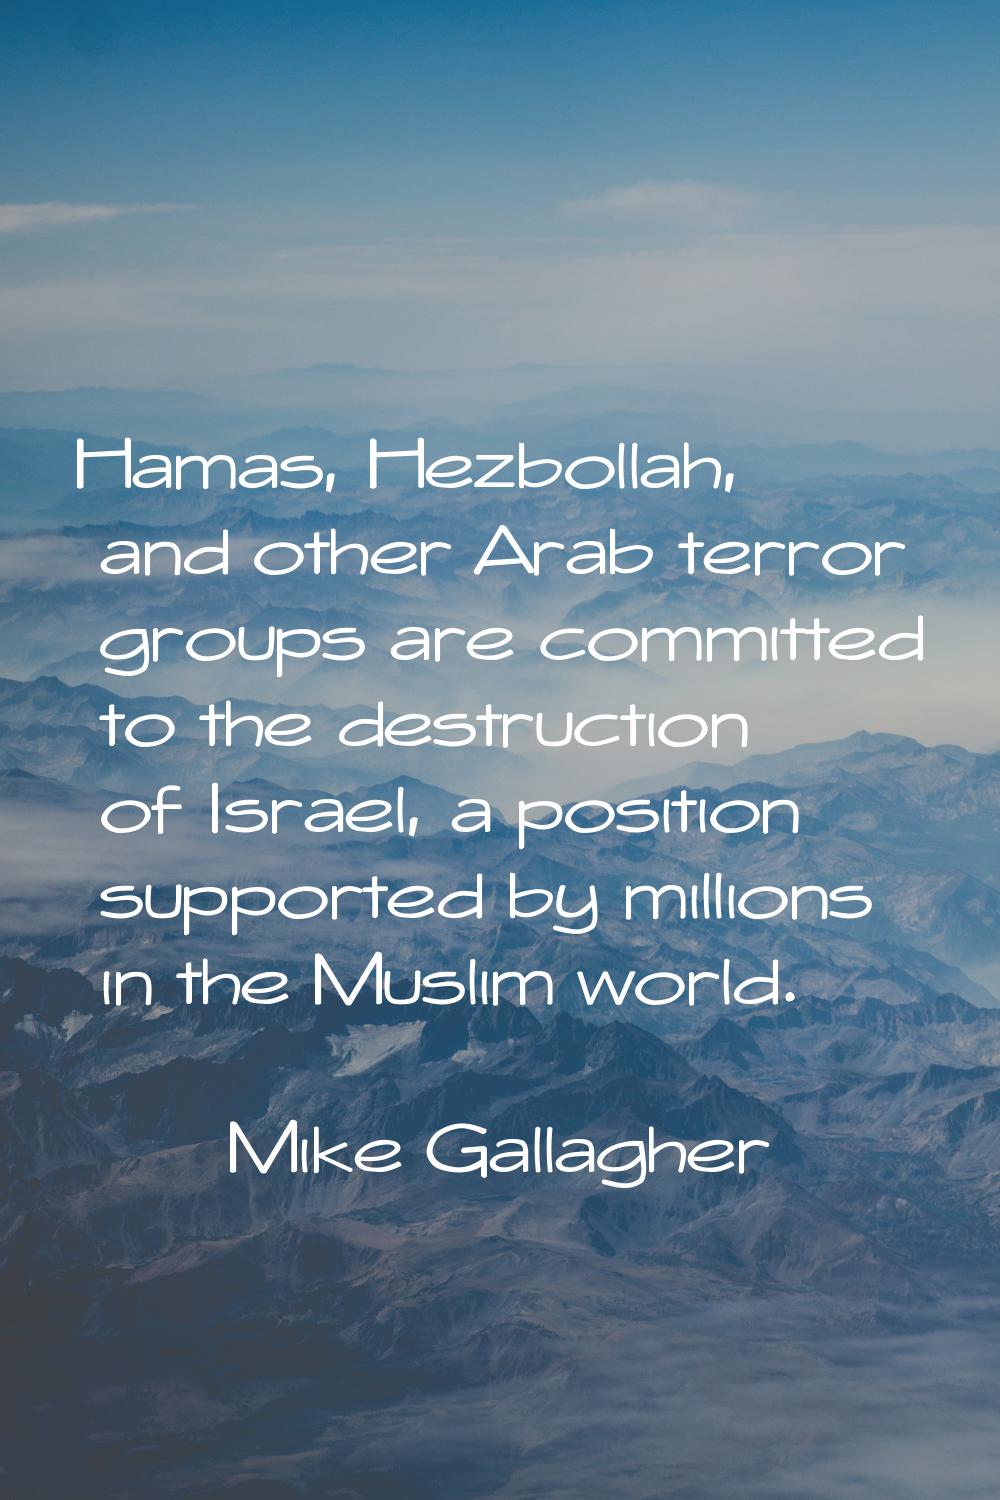 Hamas, Hezbollah, and other Arab terror groups are committed to the destruction of Israel, a positi